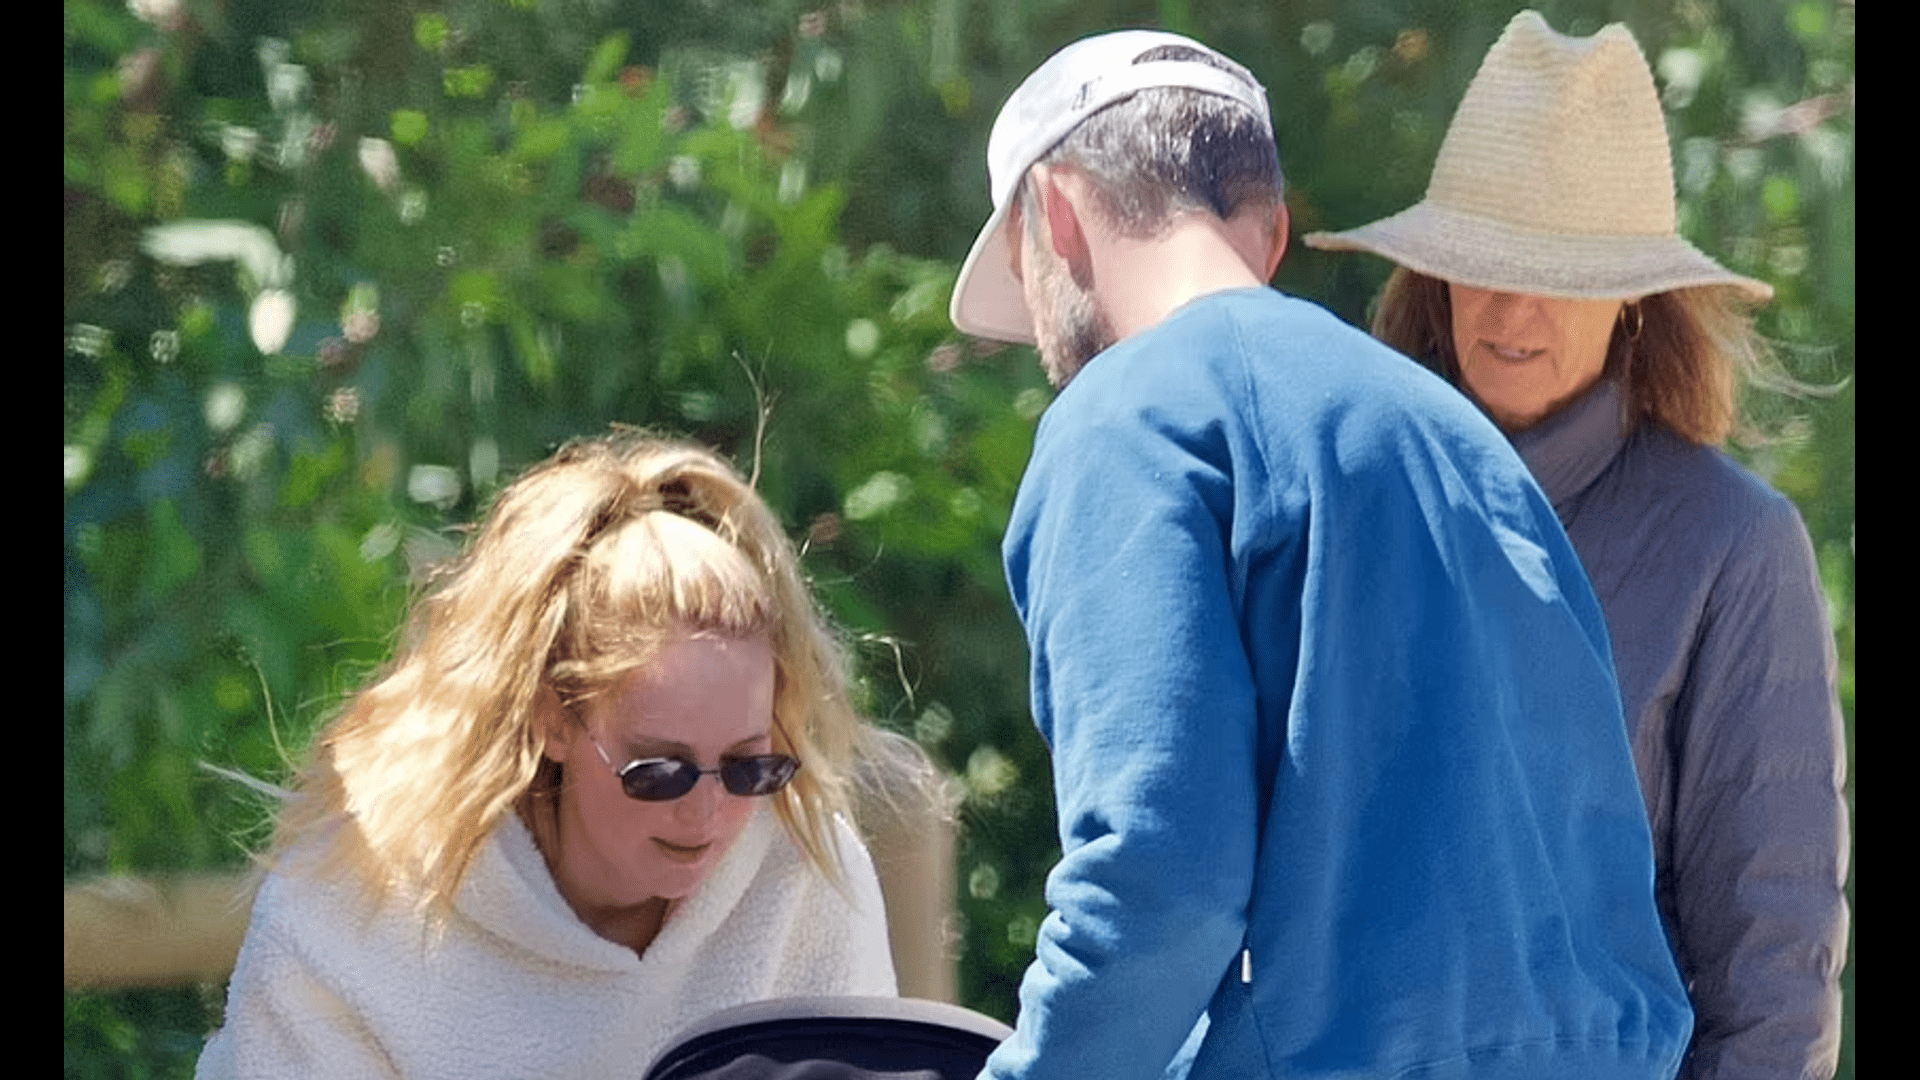 Jennifer Lawrence was spotted walking with her first child for the first time